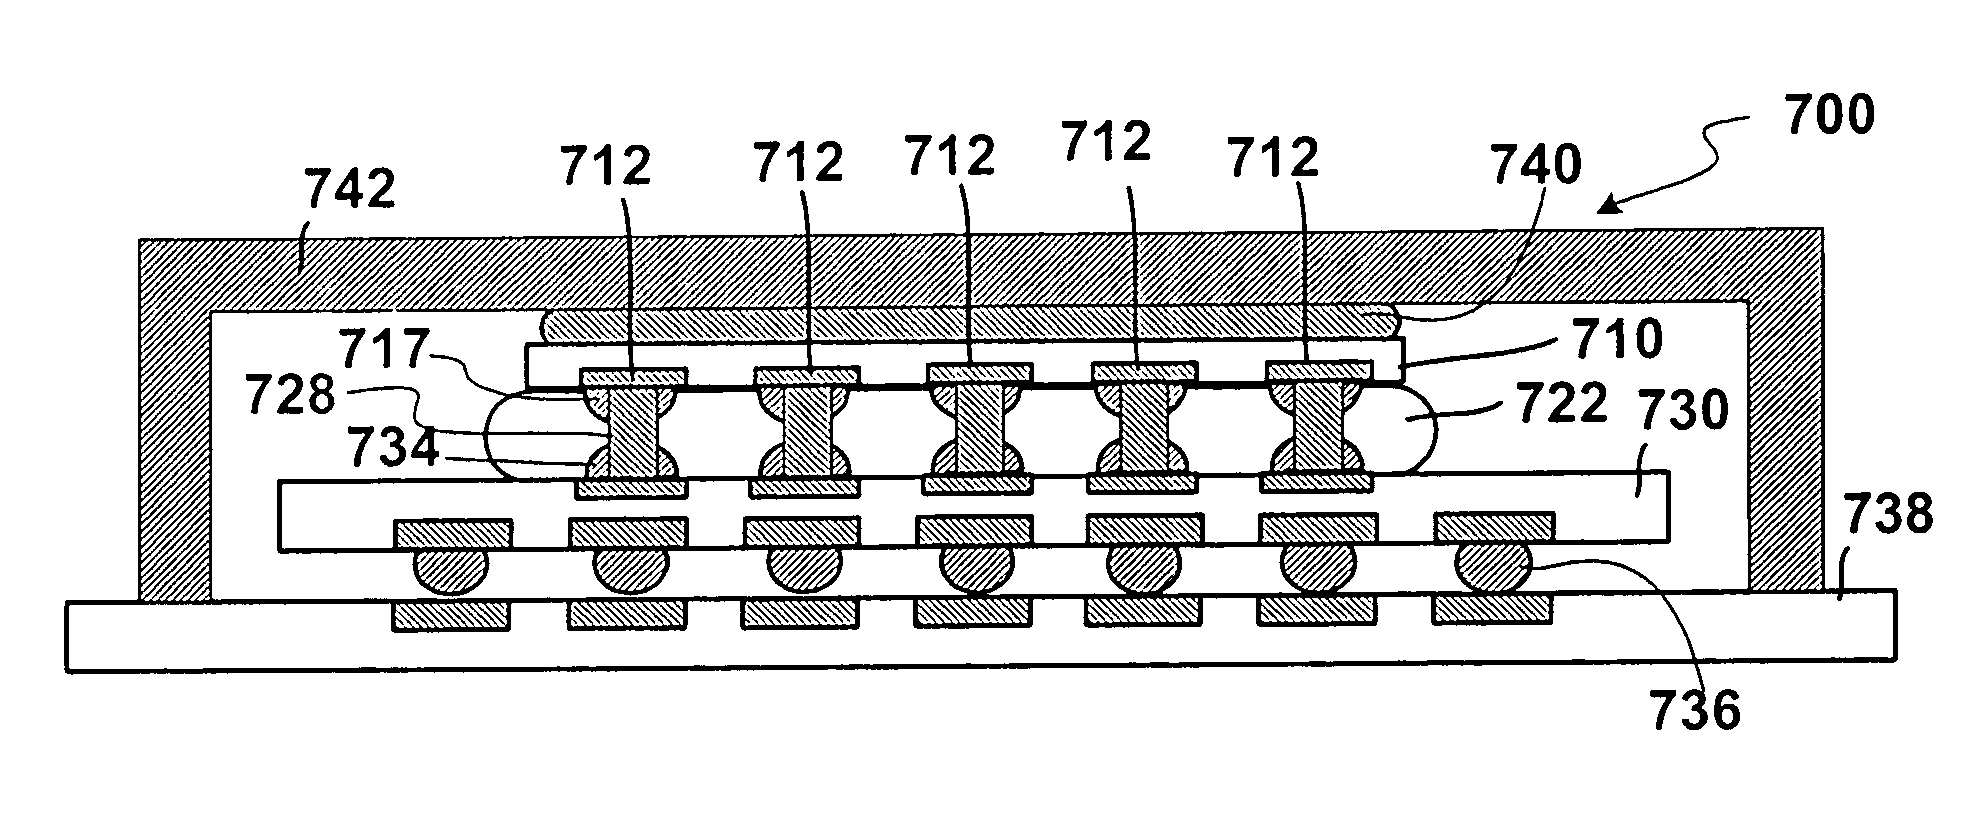 Electromigration-resistant and compliant wire interconnects, nano-sized solder compositions, systems made thereof, and methods of assembling soldered packages